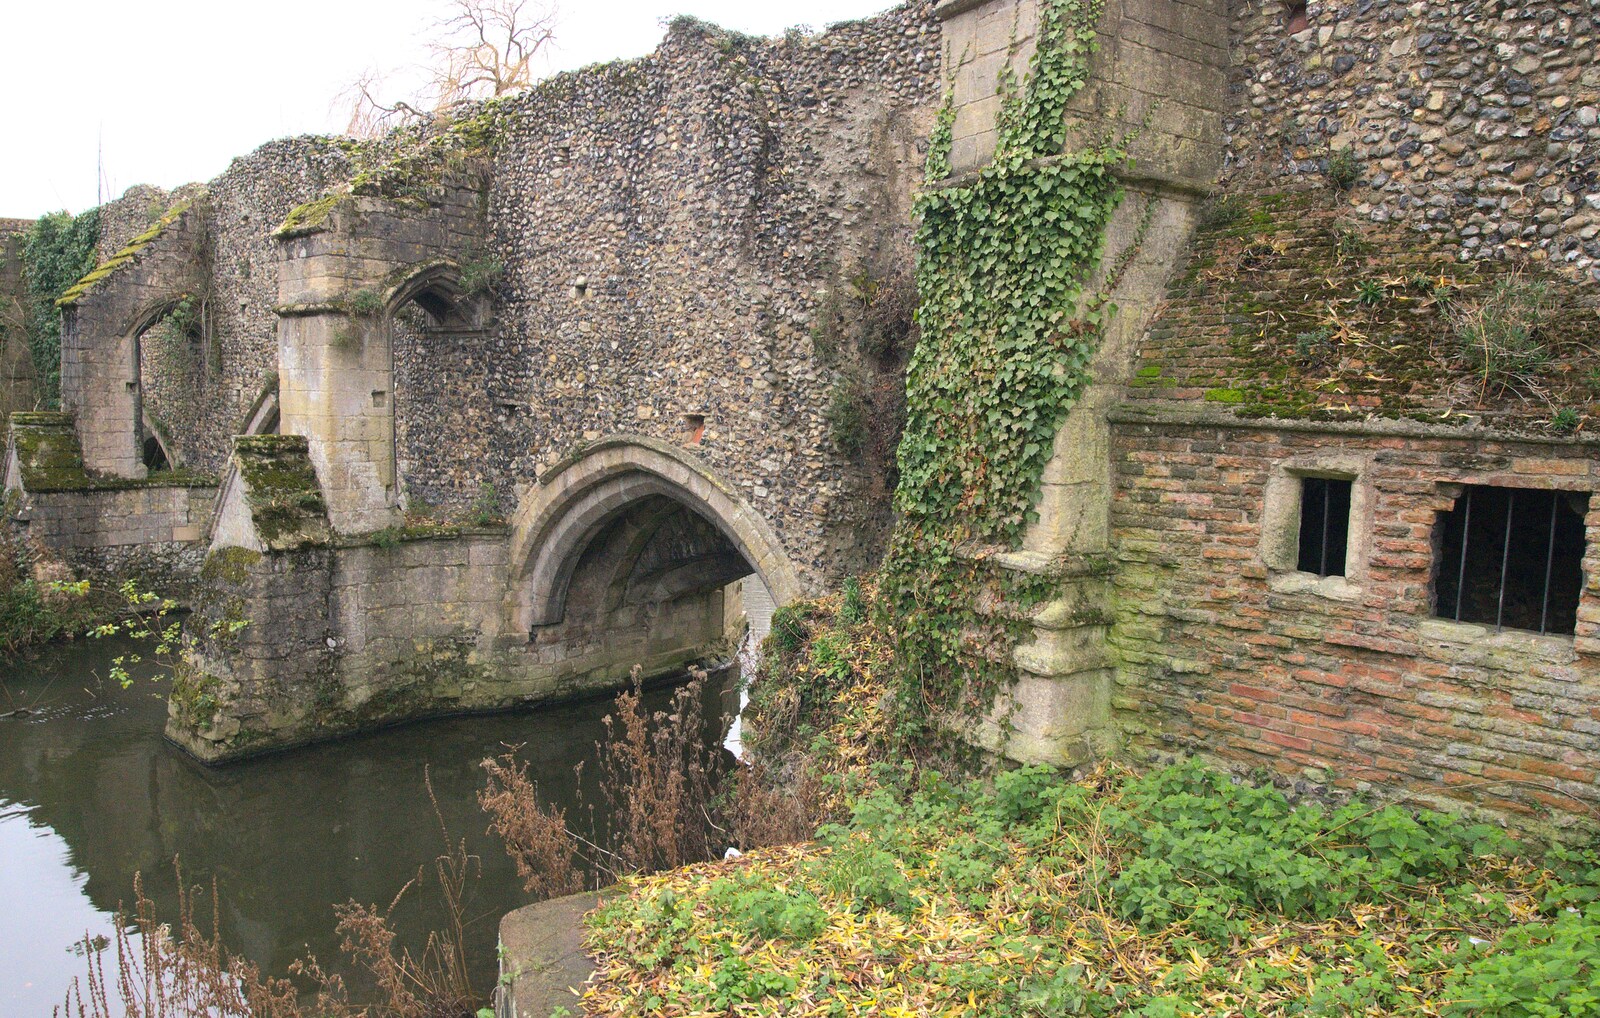 The old Abbey bridge from Pizza Express with Grandad, Bury St. Edmunds, Suffolk - 29th December 2011